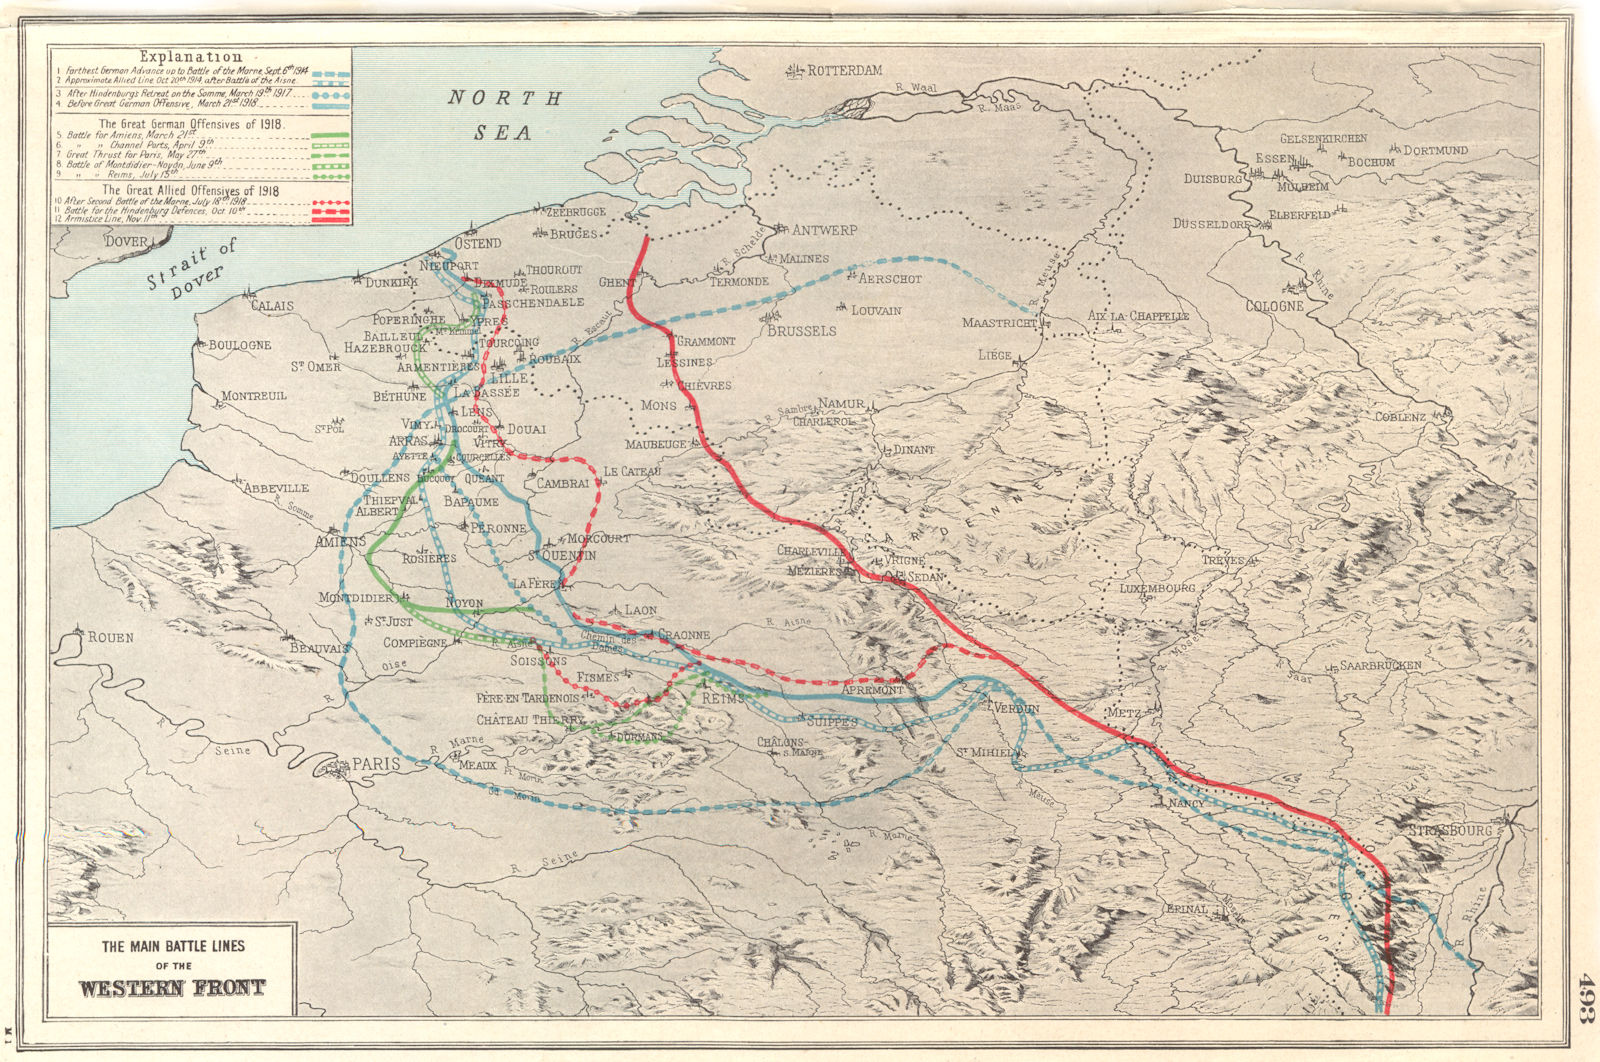 WORLD WAR 1. Main Battle lines of the Western Front. 1914-18 1920 old map